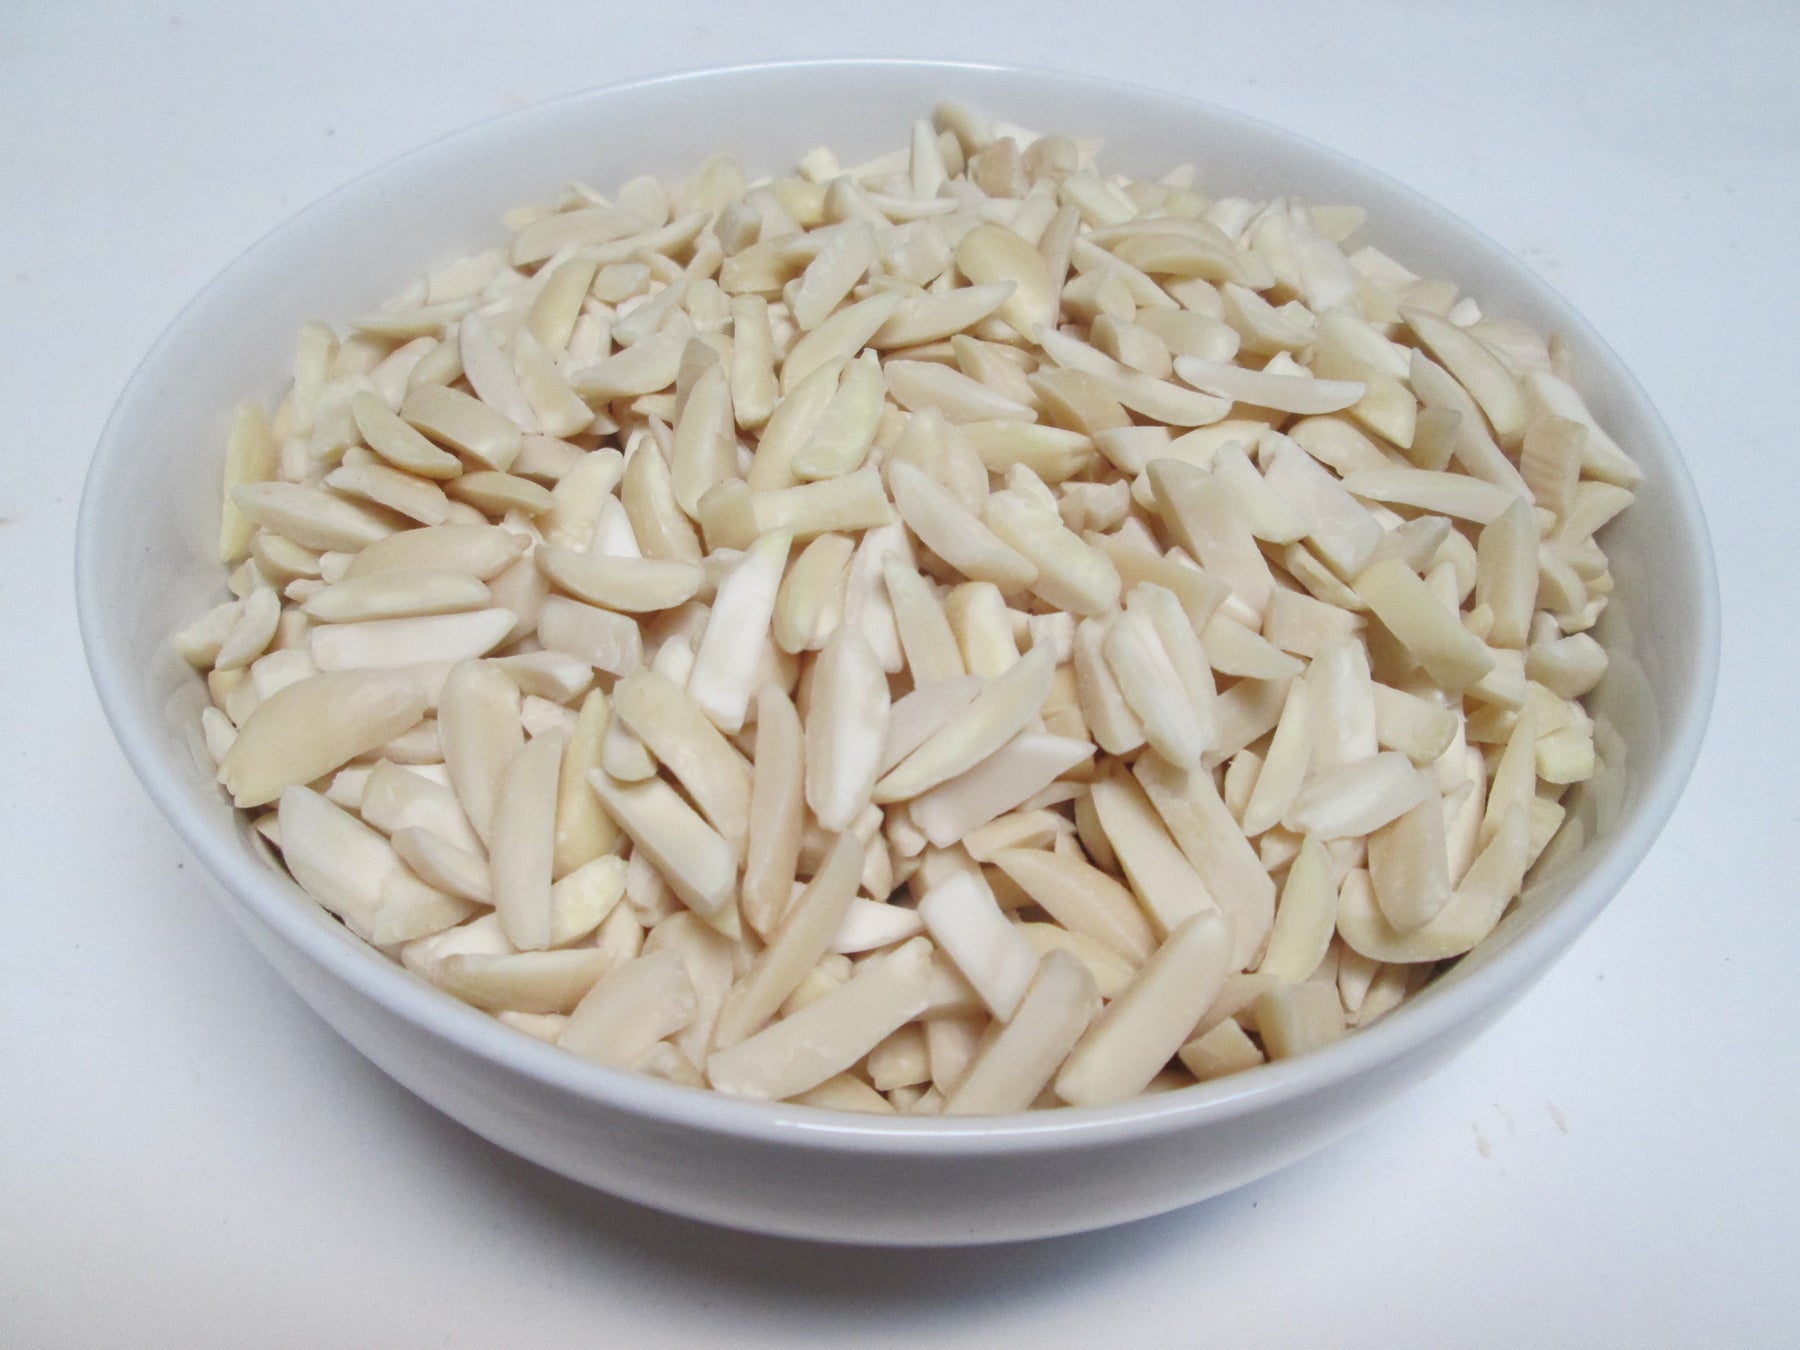 Blanched & Slivered Almonds,25 lbs / case